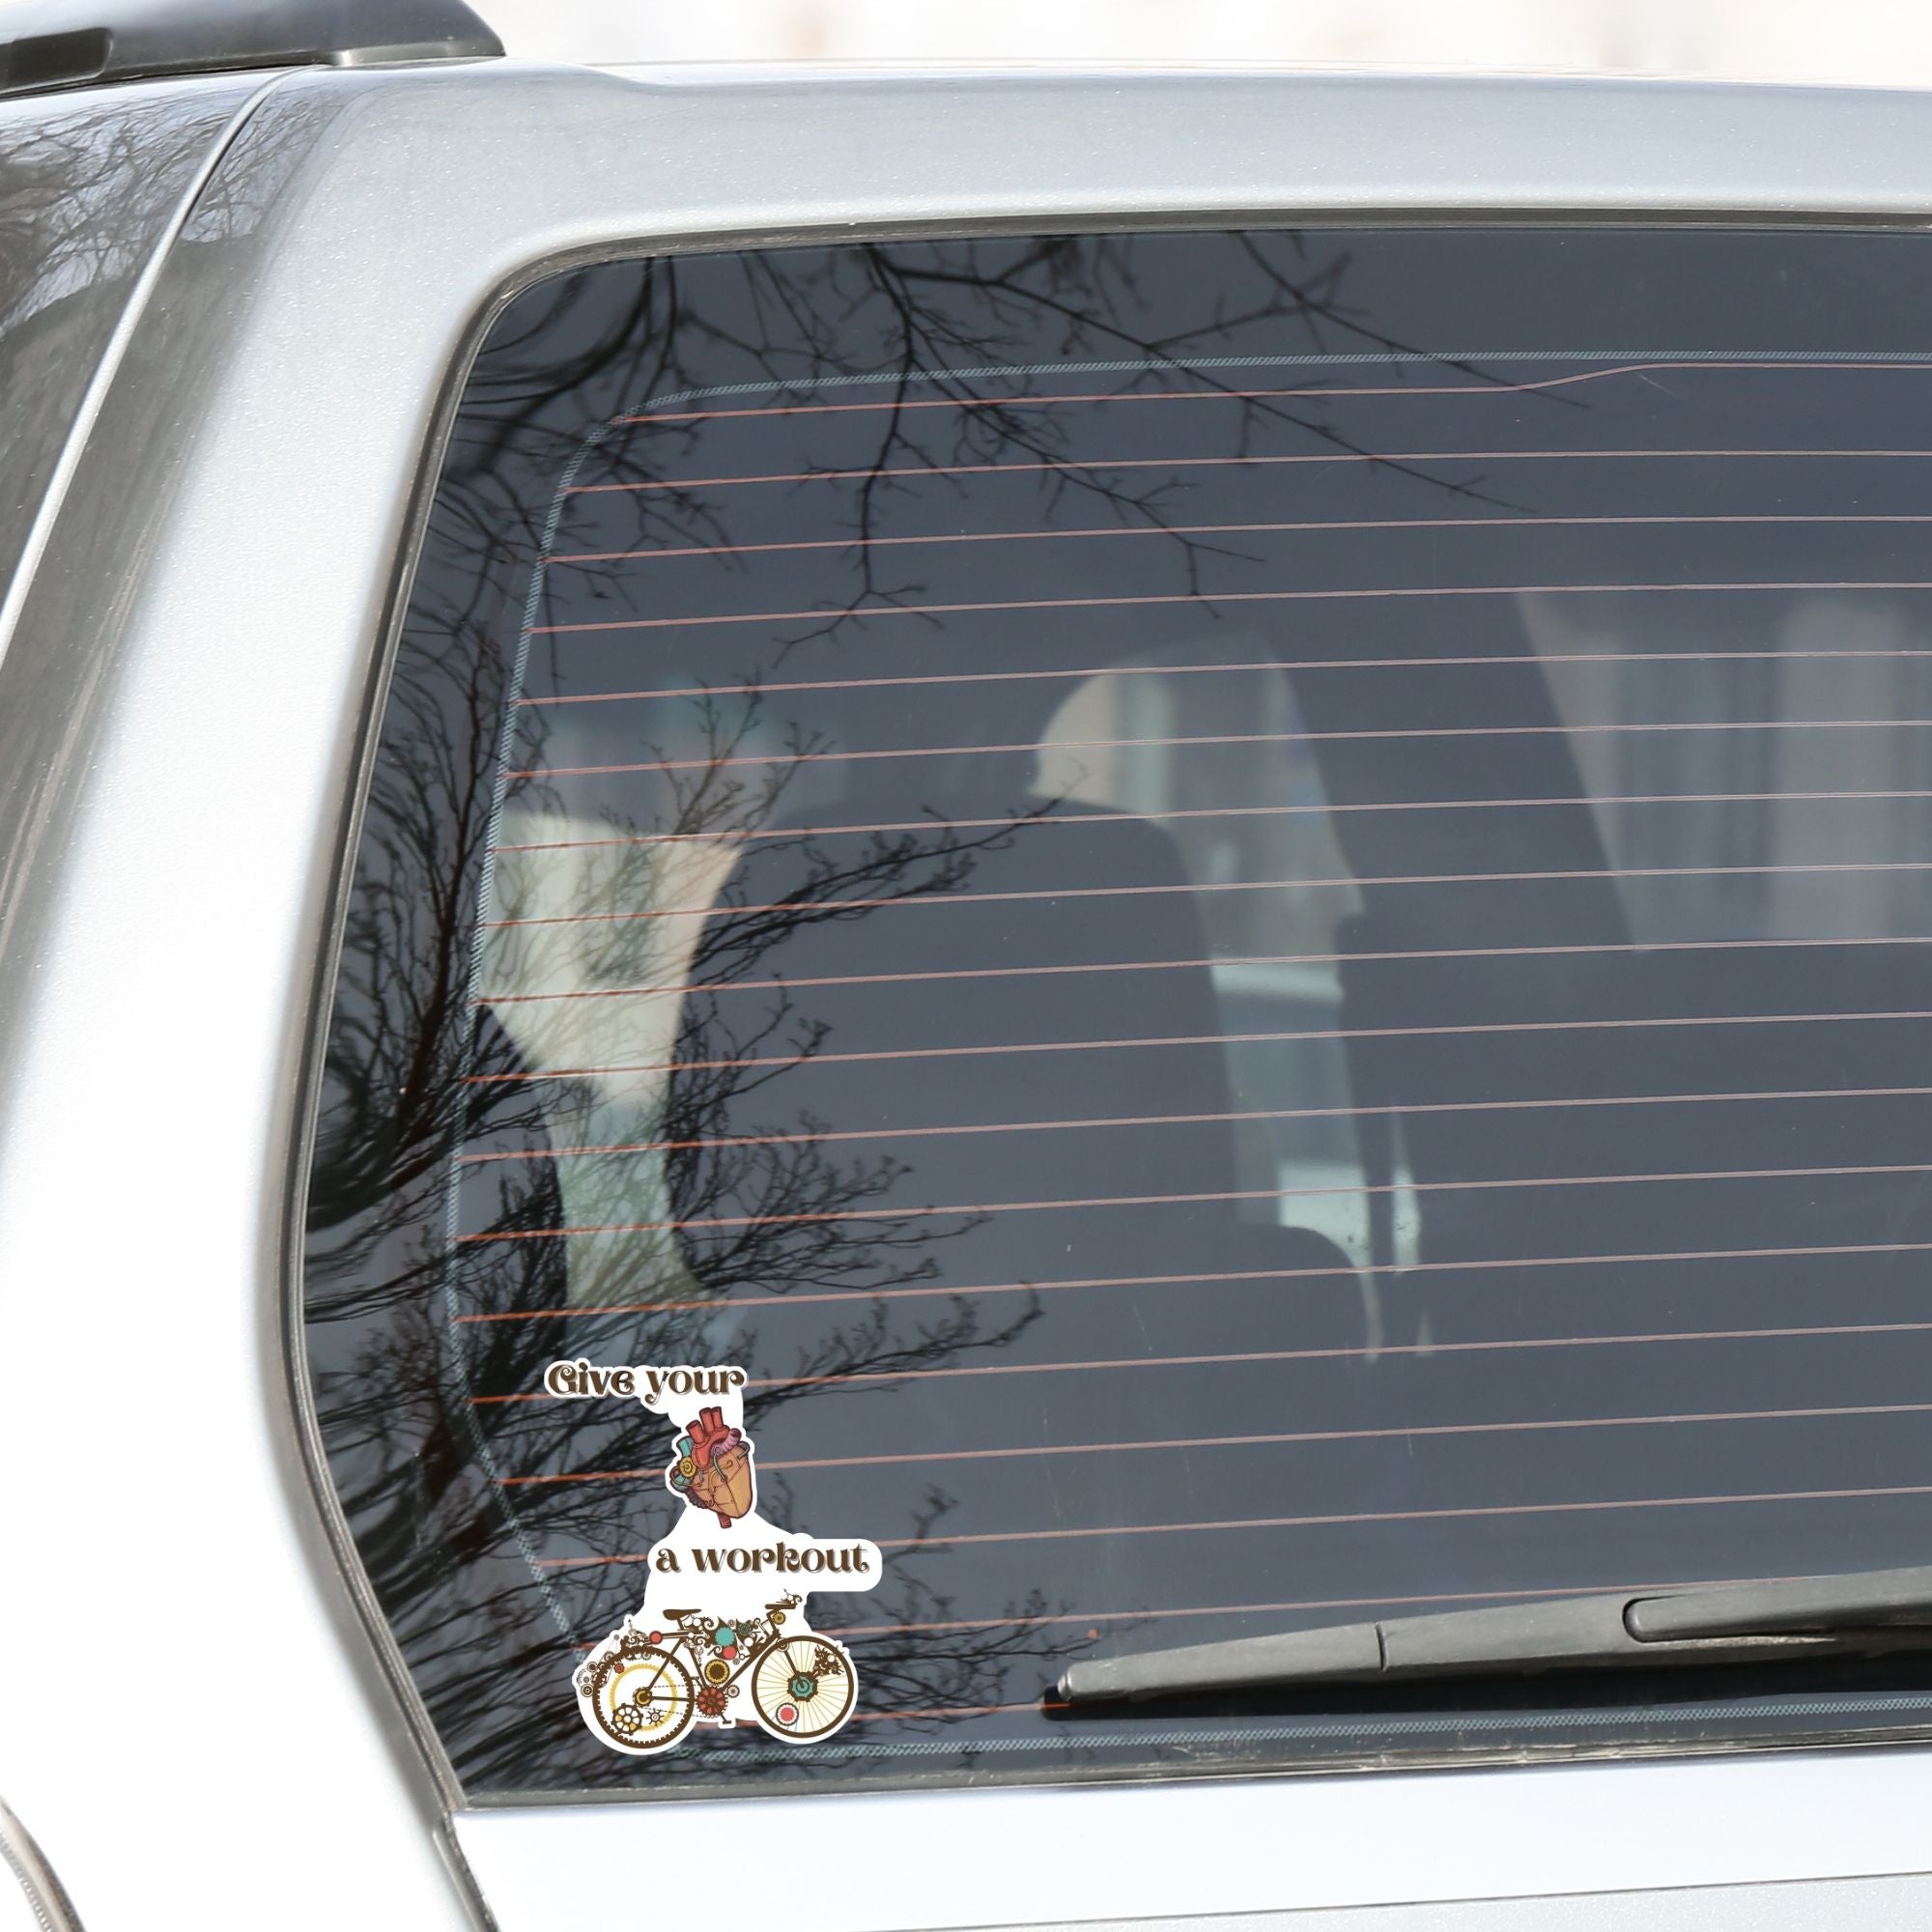 Give your heart a workout! This steampunk sticker has a steampunk anatomic heart and a steampunk bicycle. This image shows the steampunk workout sticker on the rear window of a car.